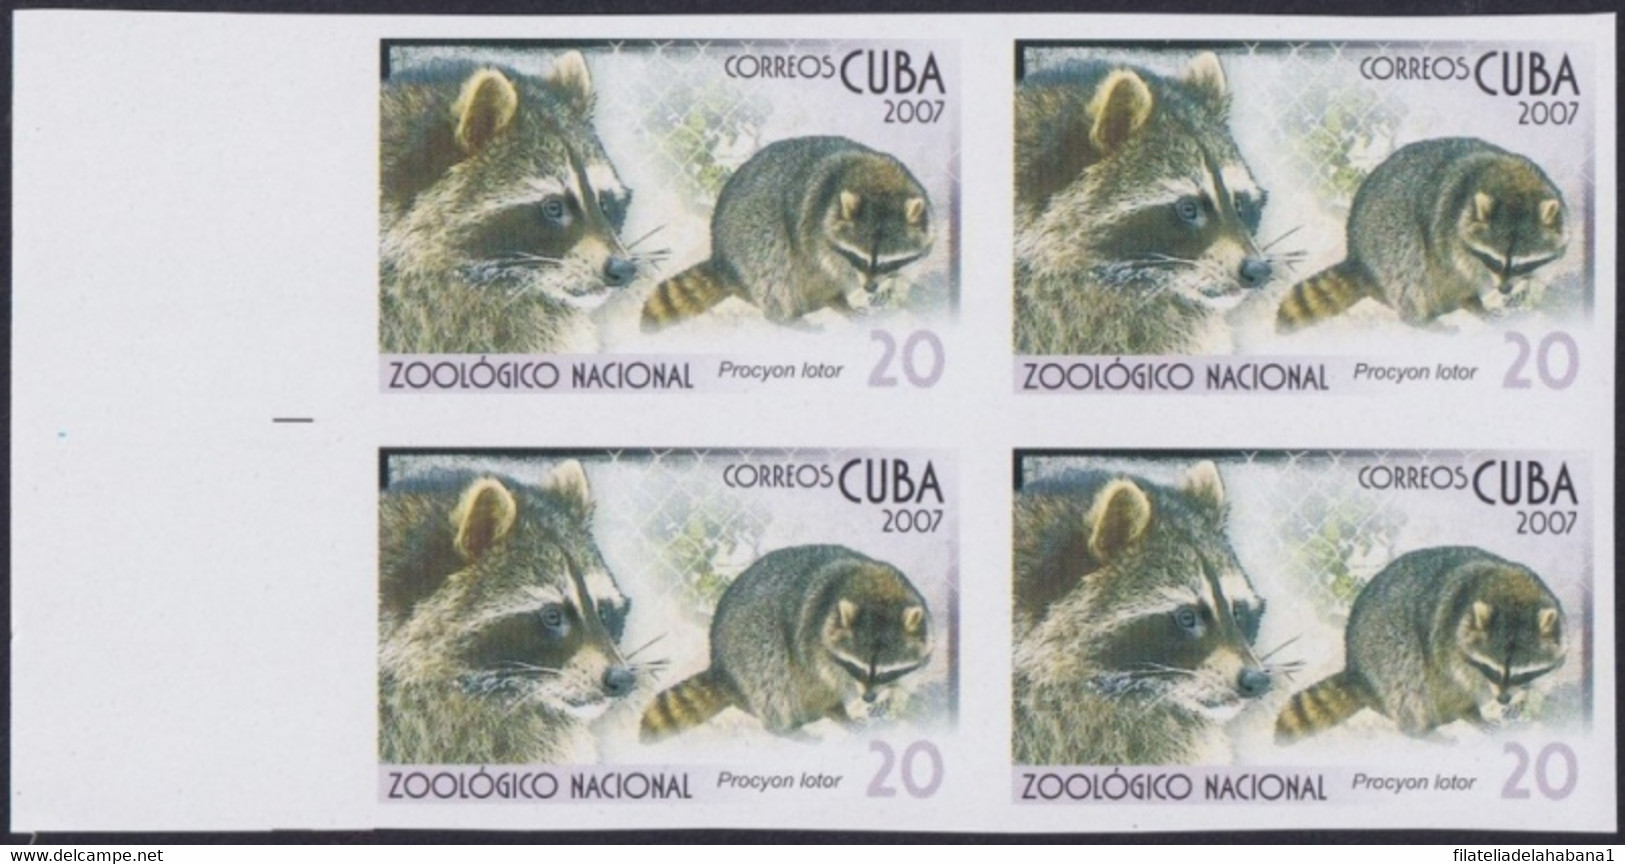 2007.709 CUBA 2007 20c MNH IMPERFORATED PROOF VIRGEN KEY FAUNA ZOO MAPACHE. - Imperforates, Proofs & Errors